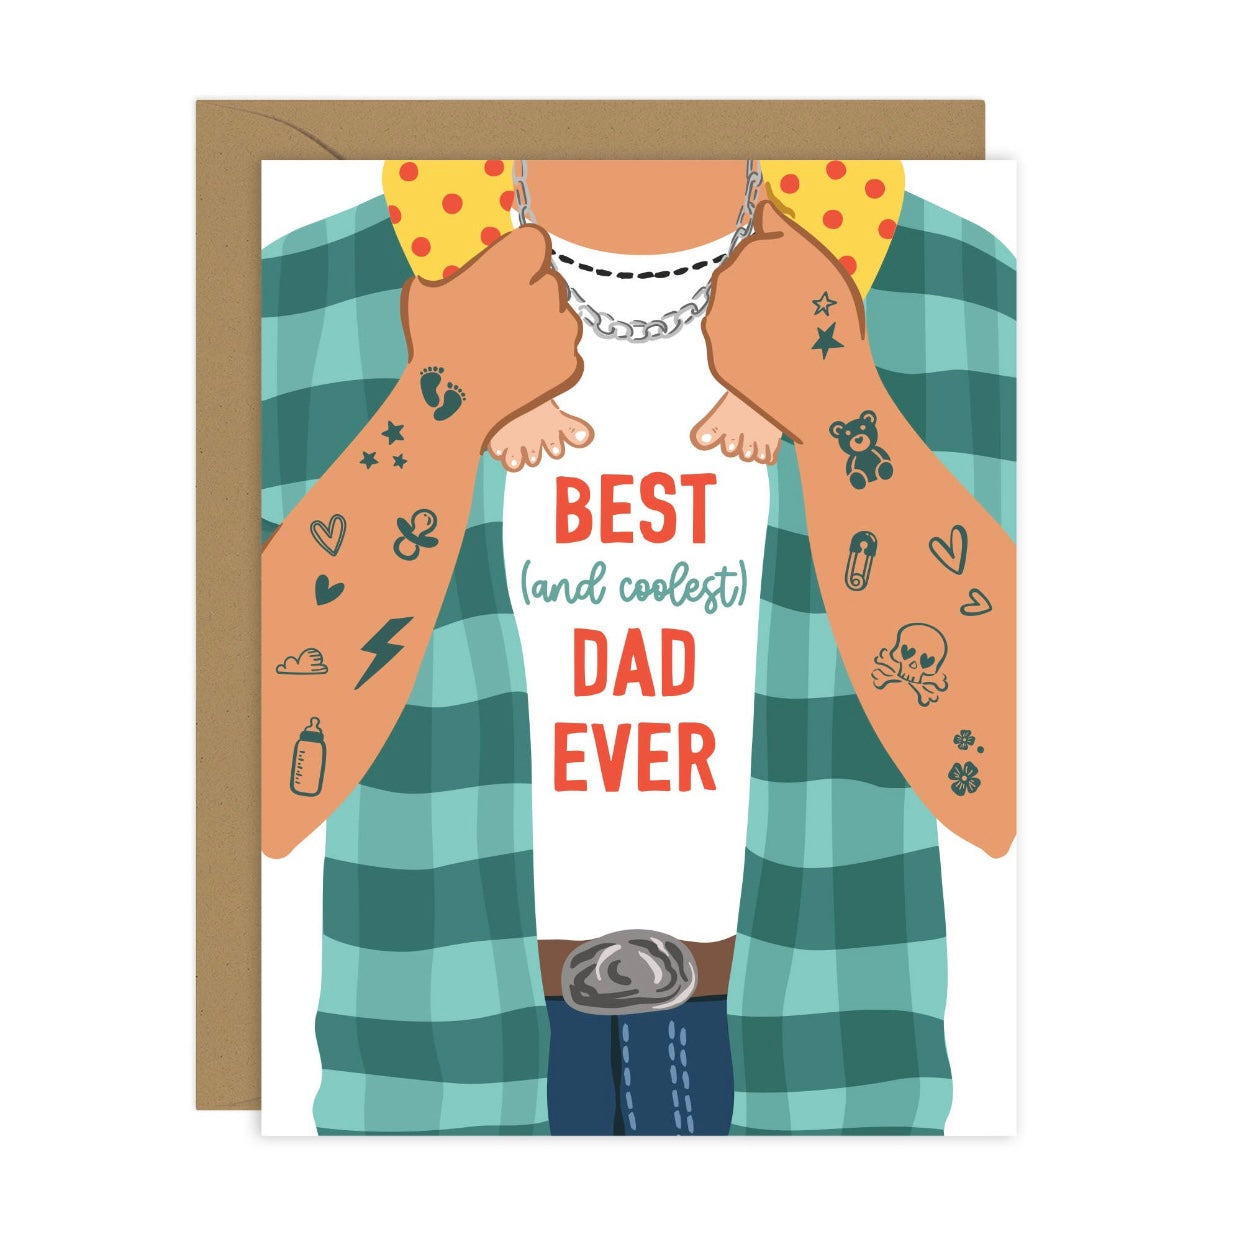 Best (and coolest) Dad Ever - Father’s Day Card (A2)